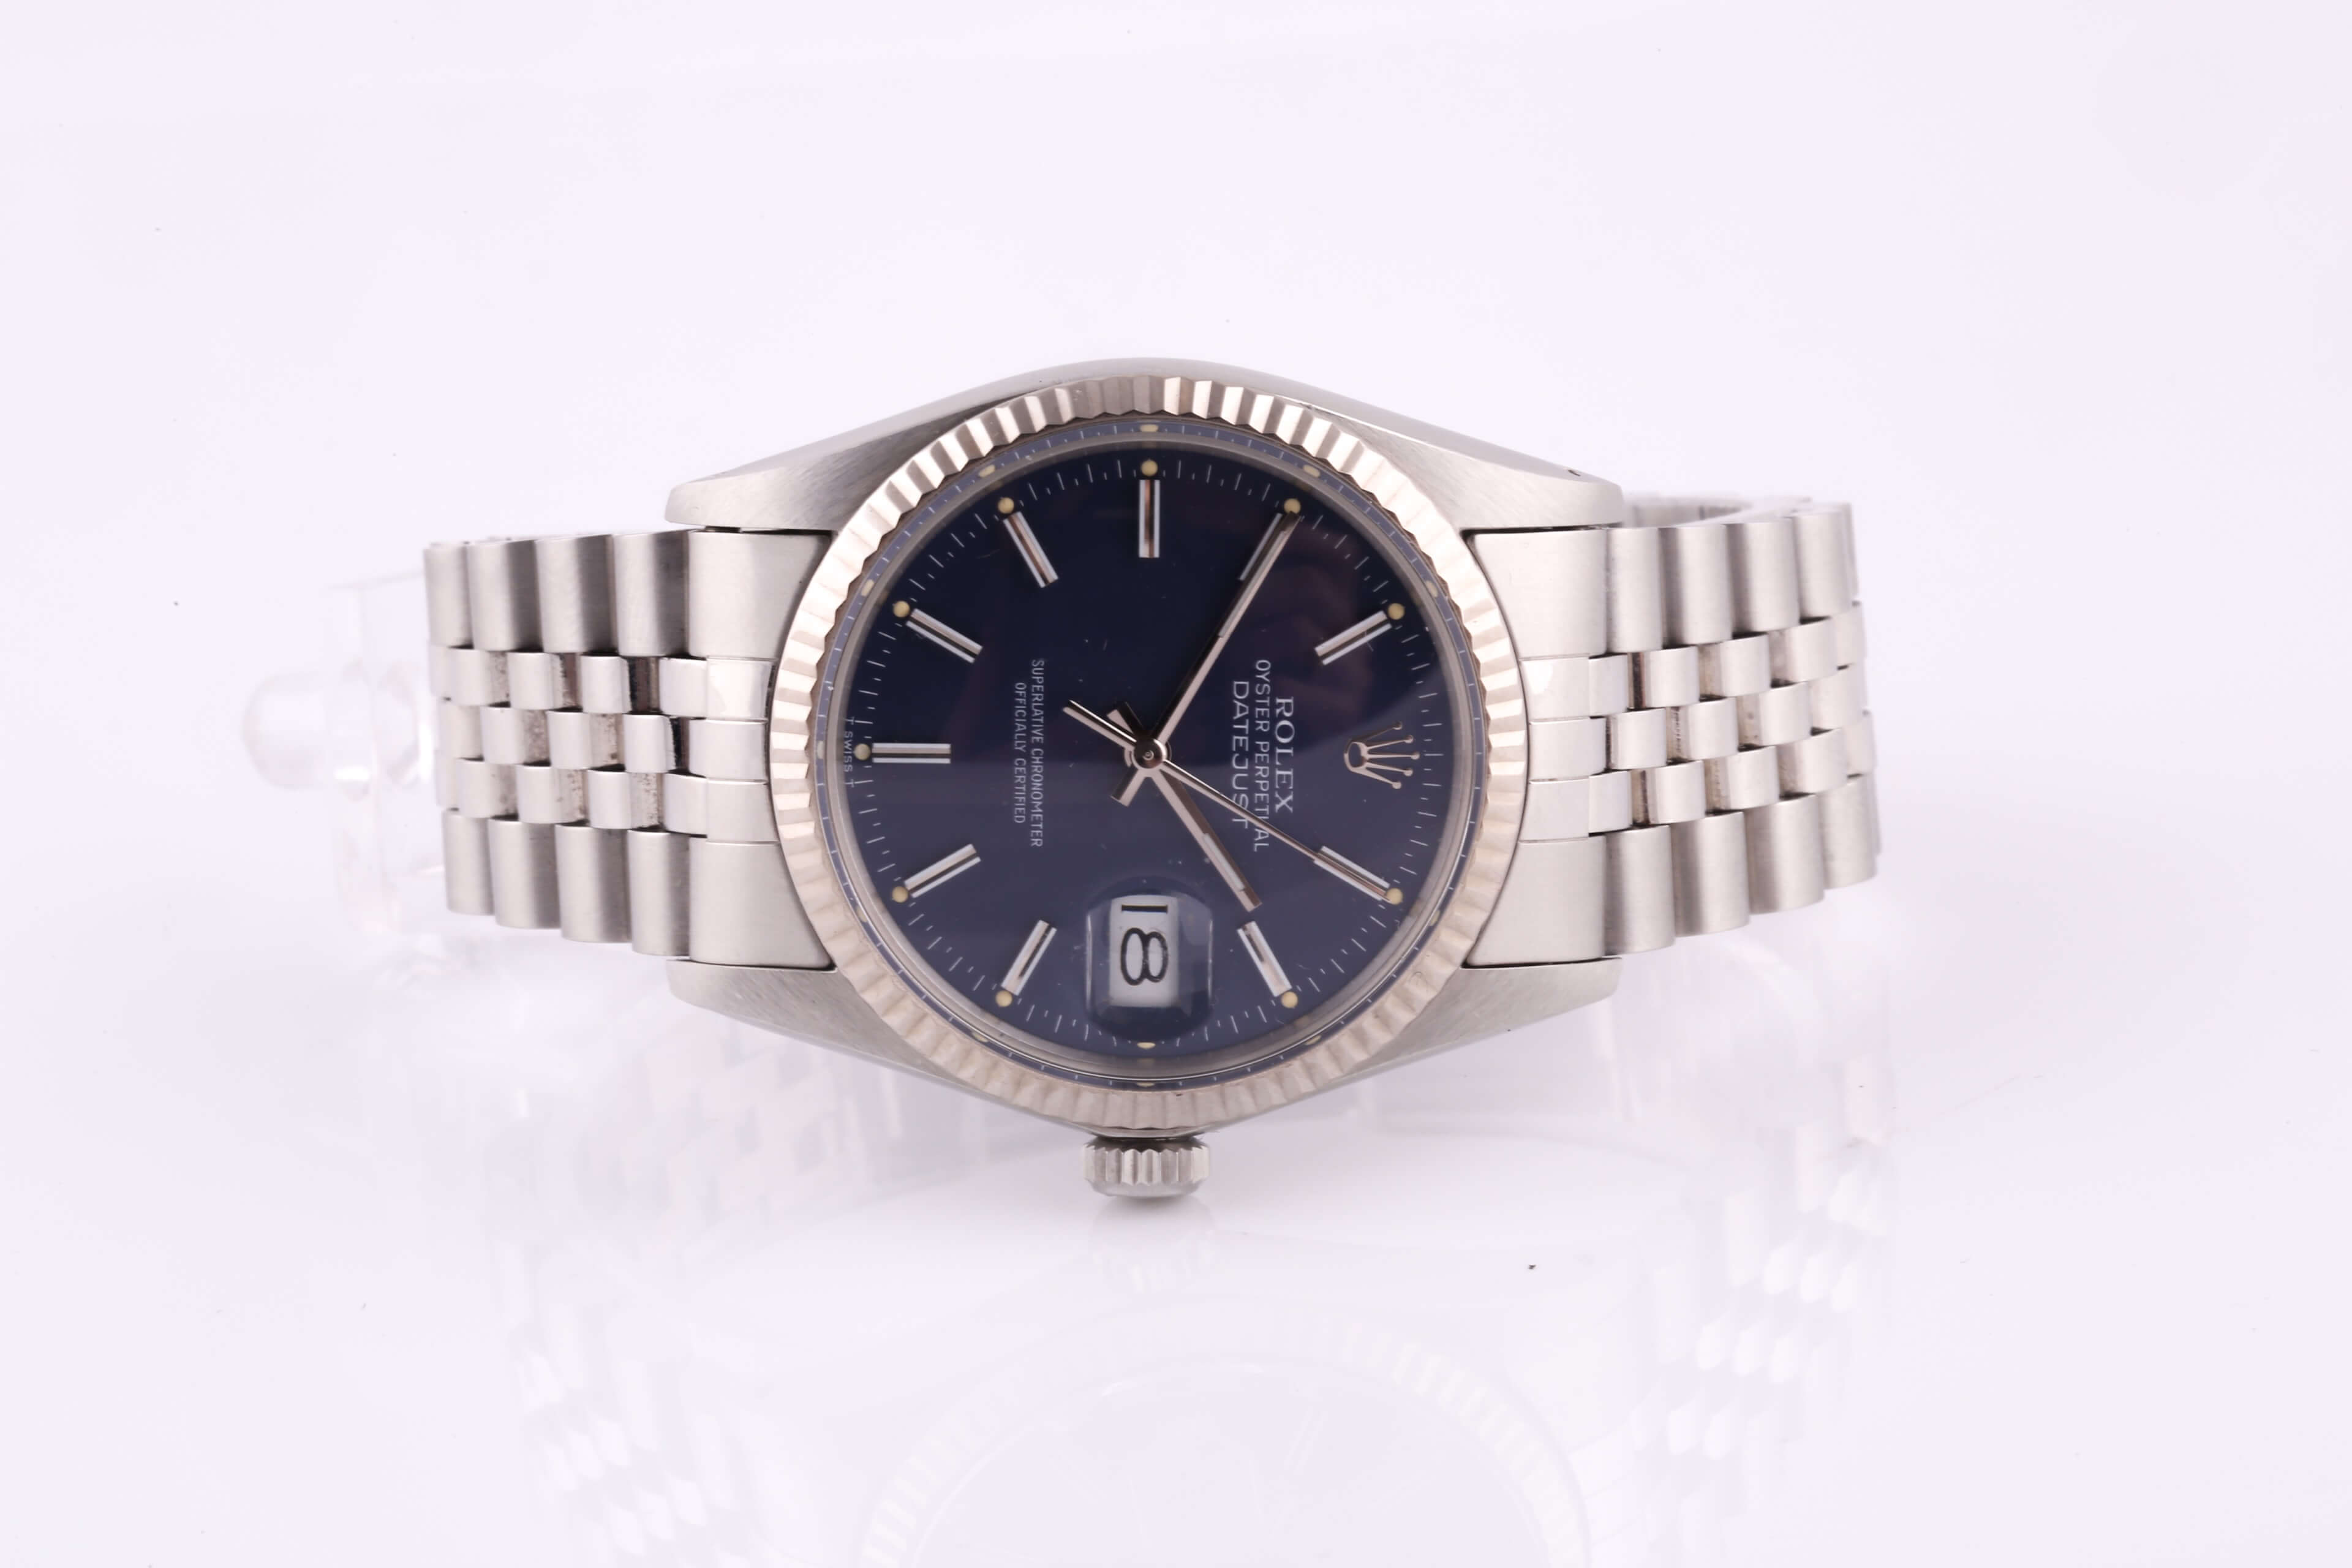 A 1984 Rolex Oyster Perpetual ref. 16014 DateJust